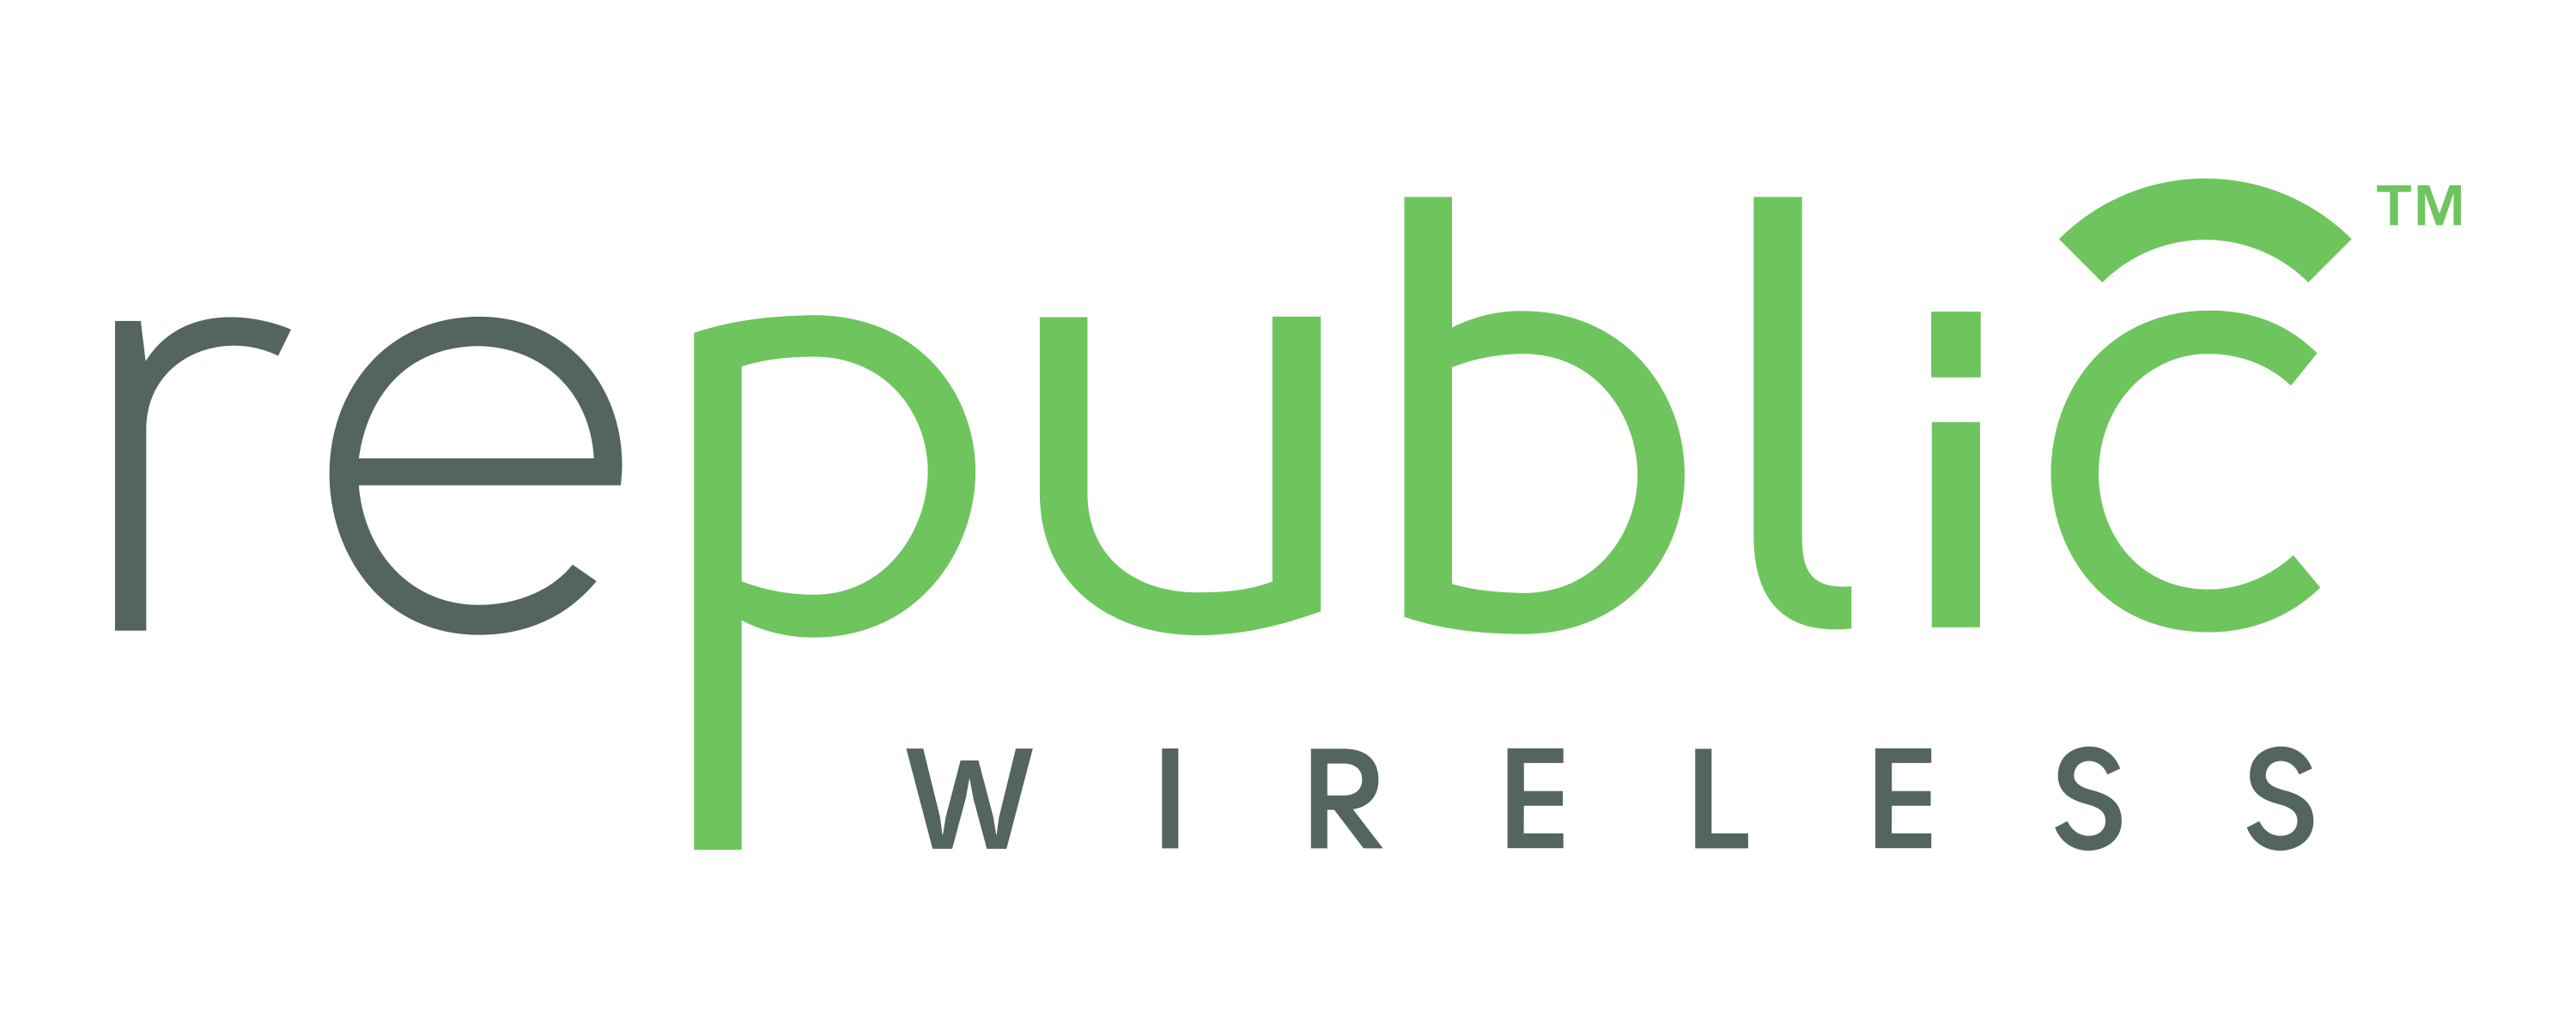 Bring Your Own Phone to Republic Wireless, the WiFi calling carrier saving Americans hundreds of dollars annually on smartphones.